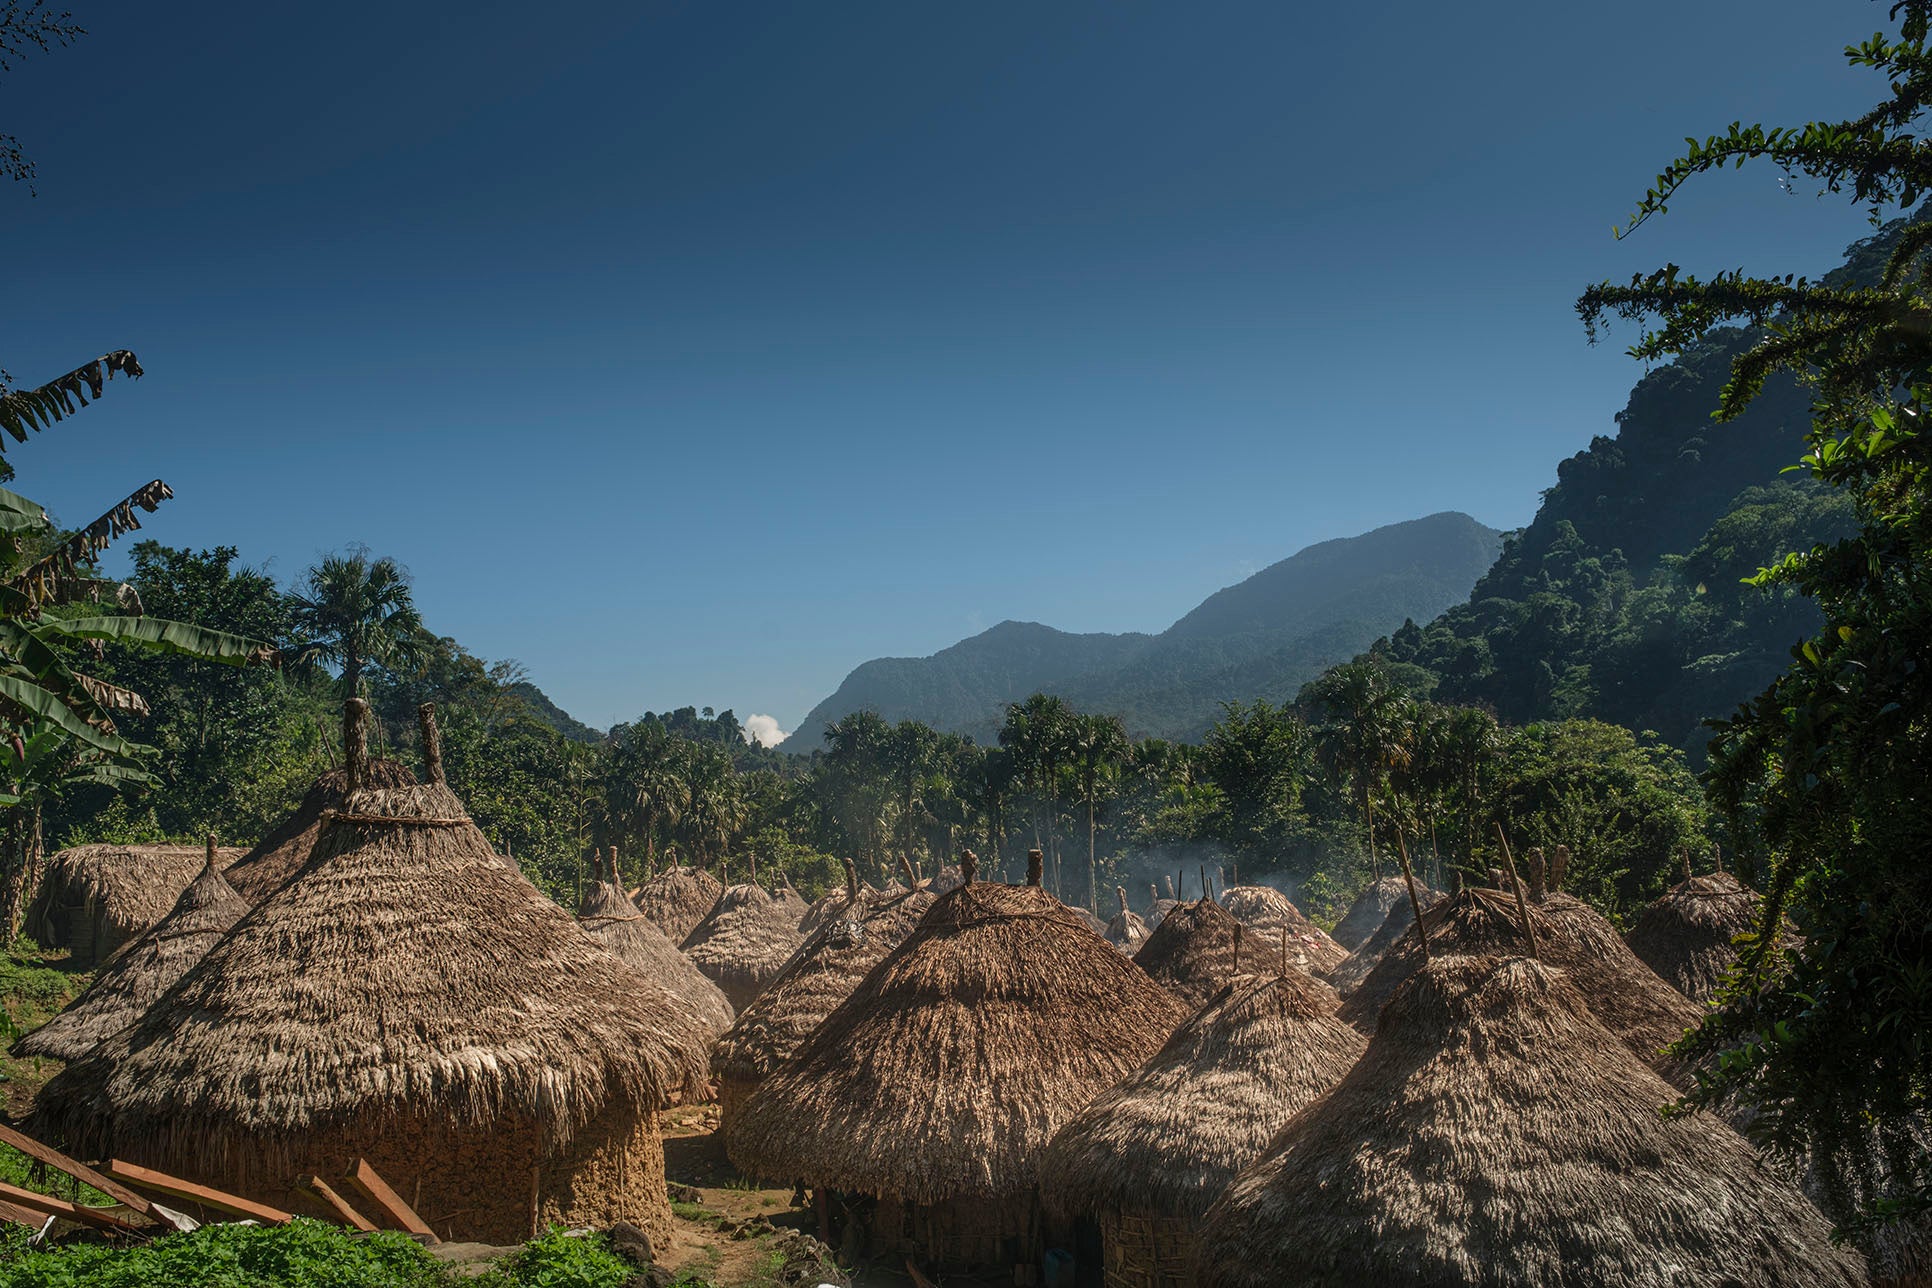 The thatched homes of the Kogui people